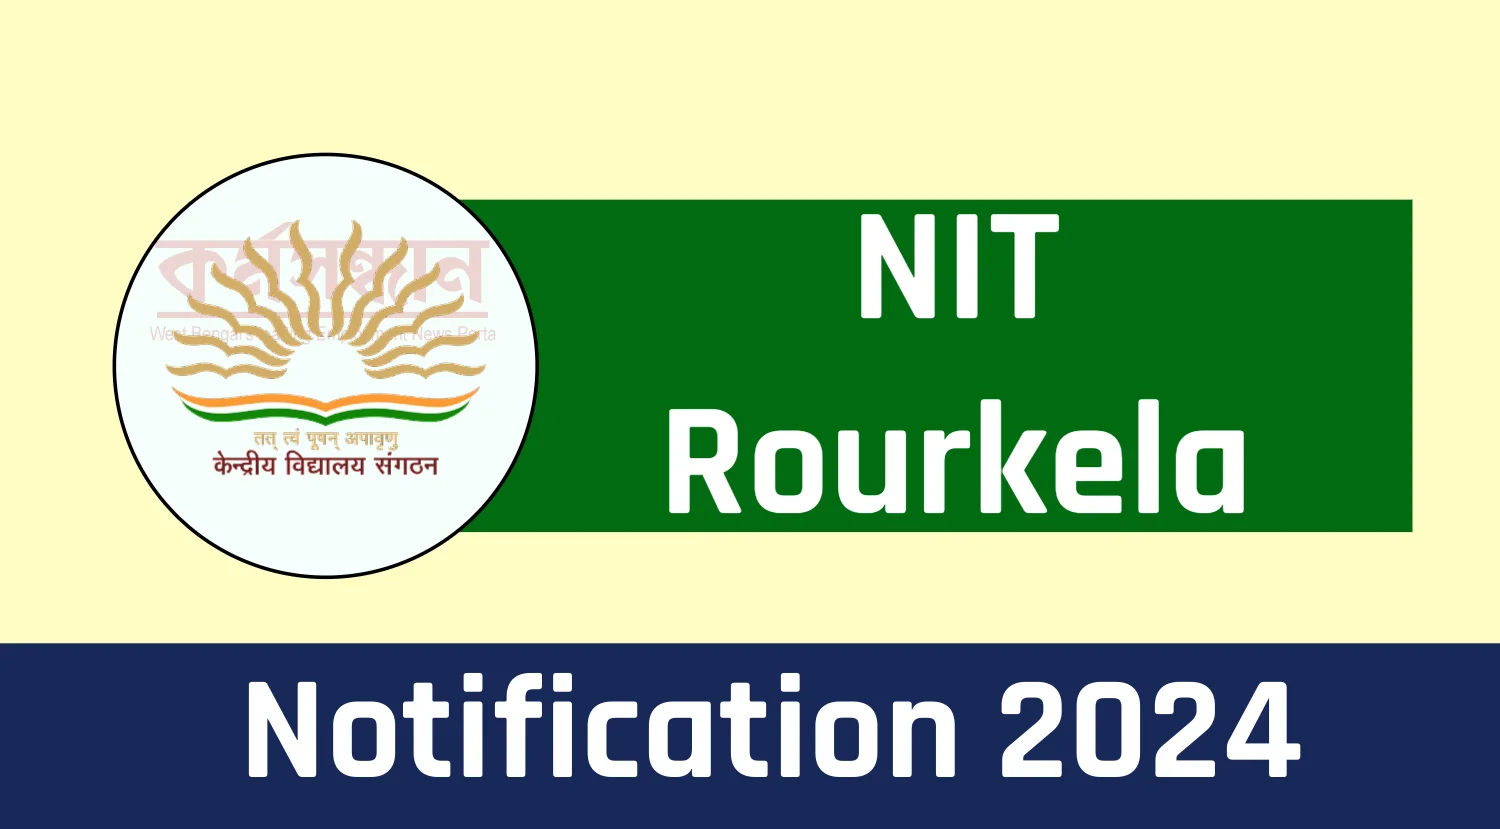 NIT Rourkela alumni mobilise funds for research with Rs 1 crore to start  with - Bhubaneswar Buzz